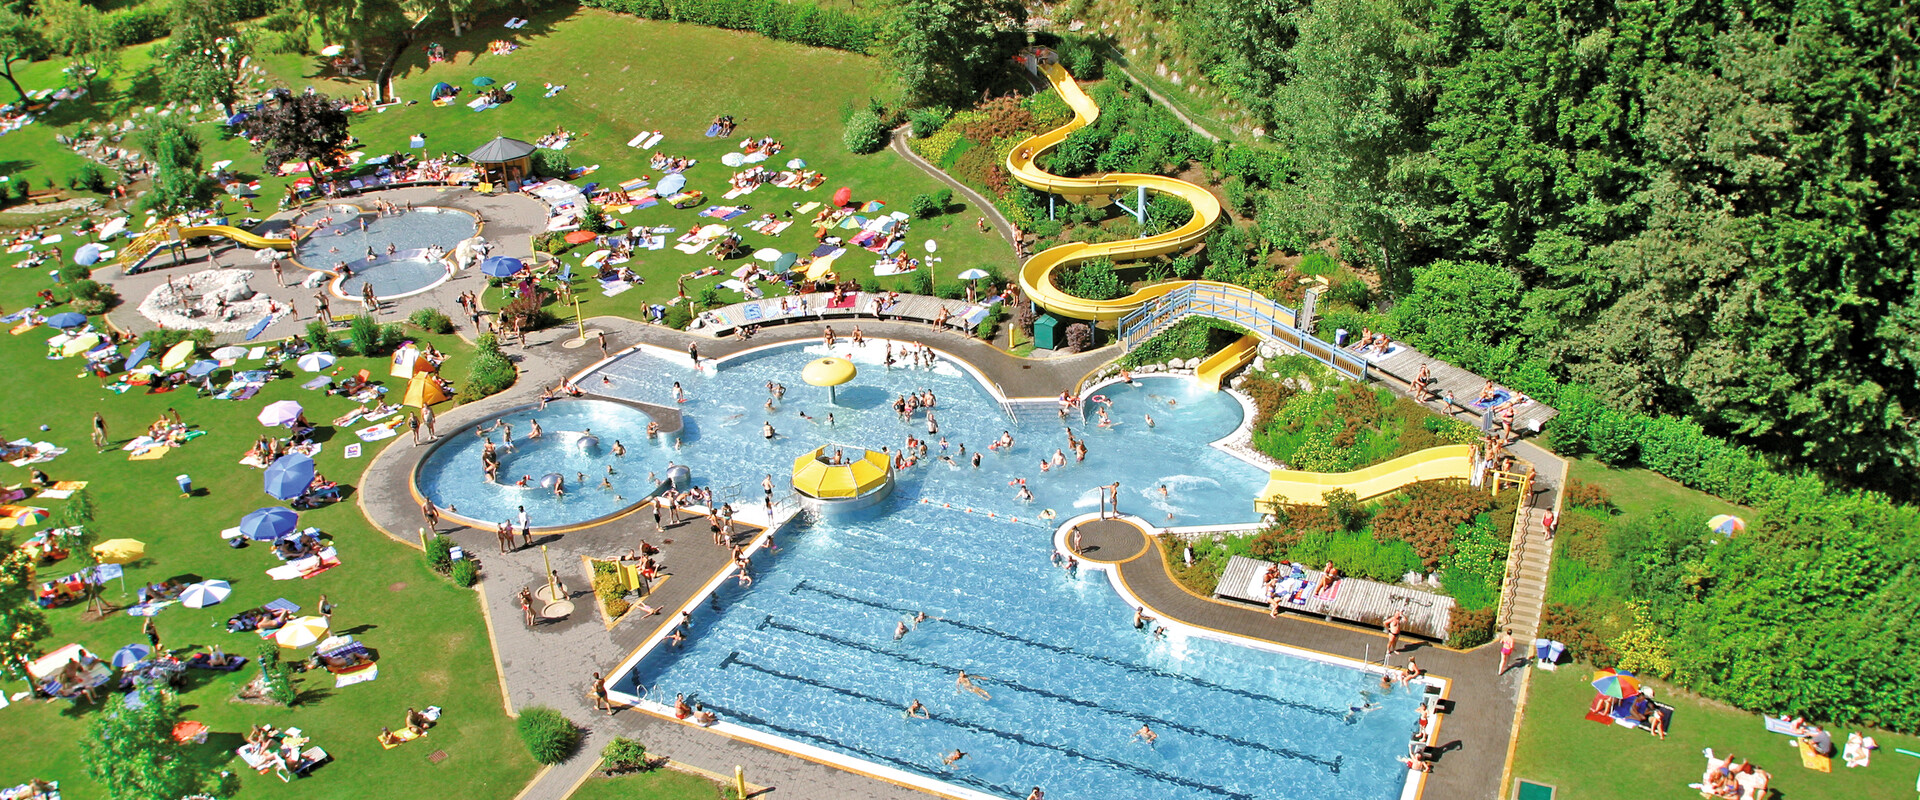 Schwimmbad in Leogang